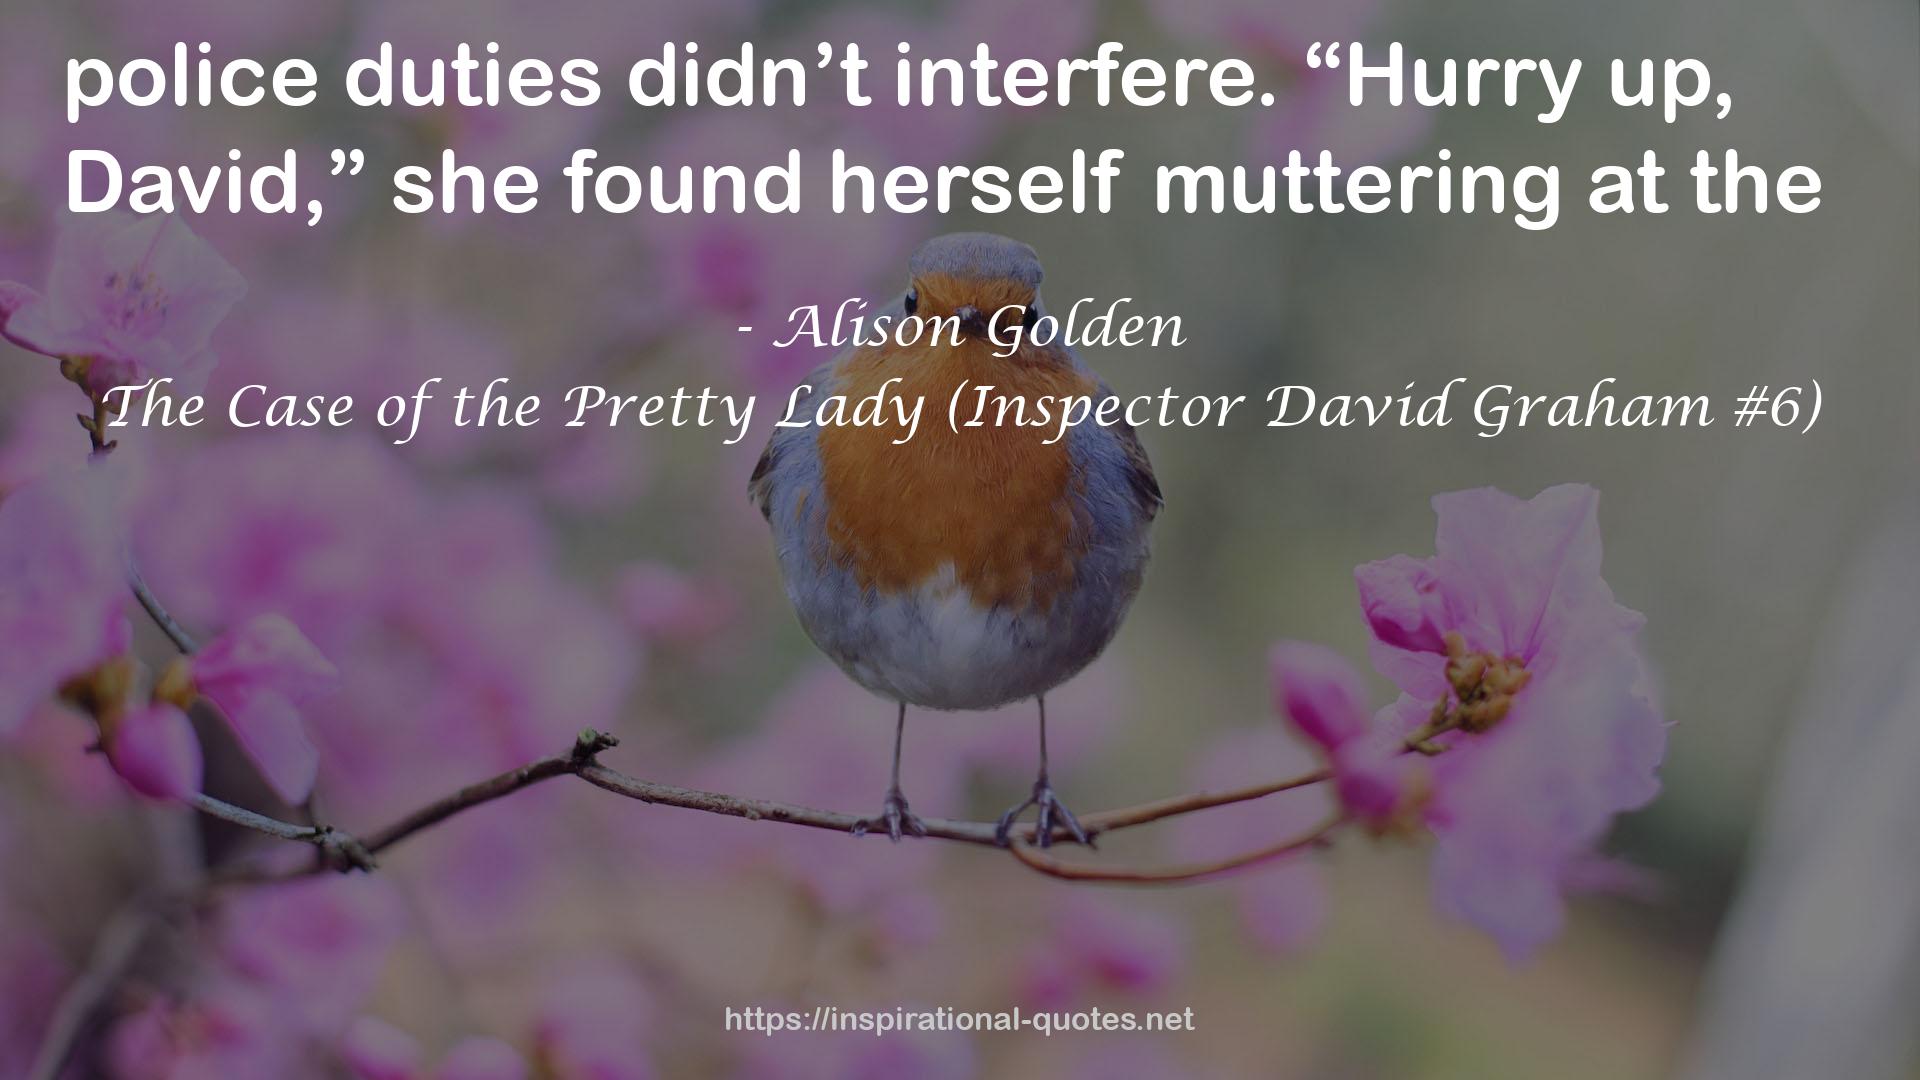 The Case of the Pretty Lady (Inspector David Graham #6) QUOTES